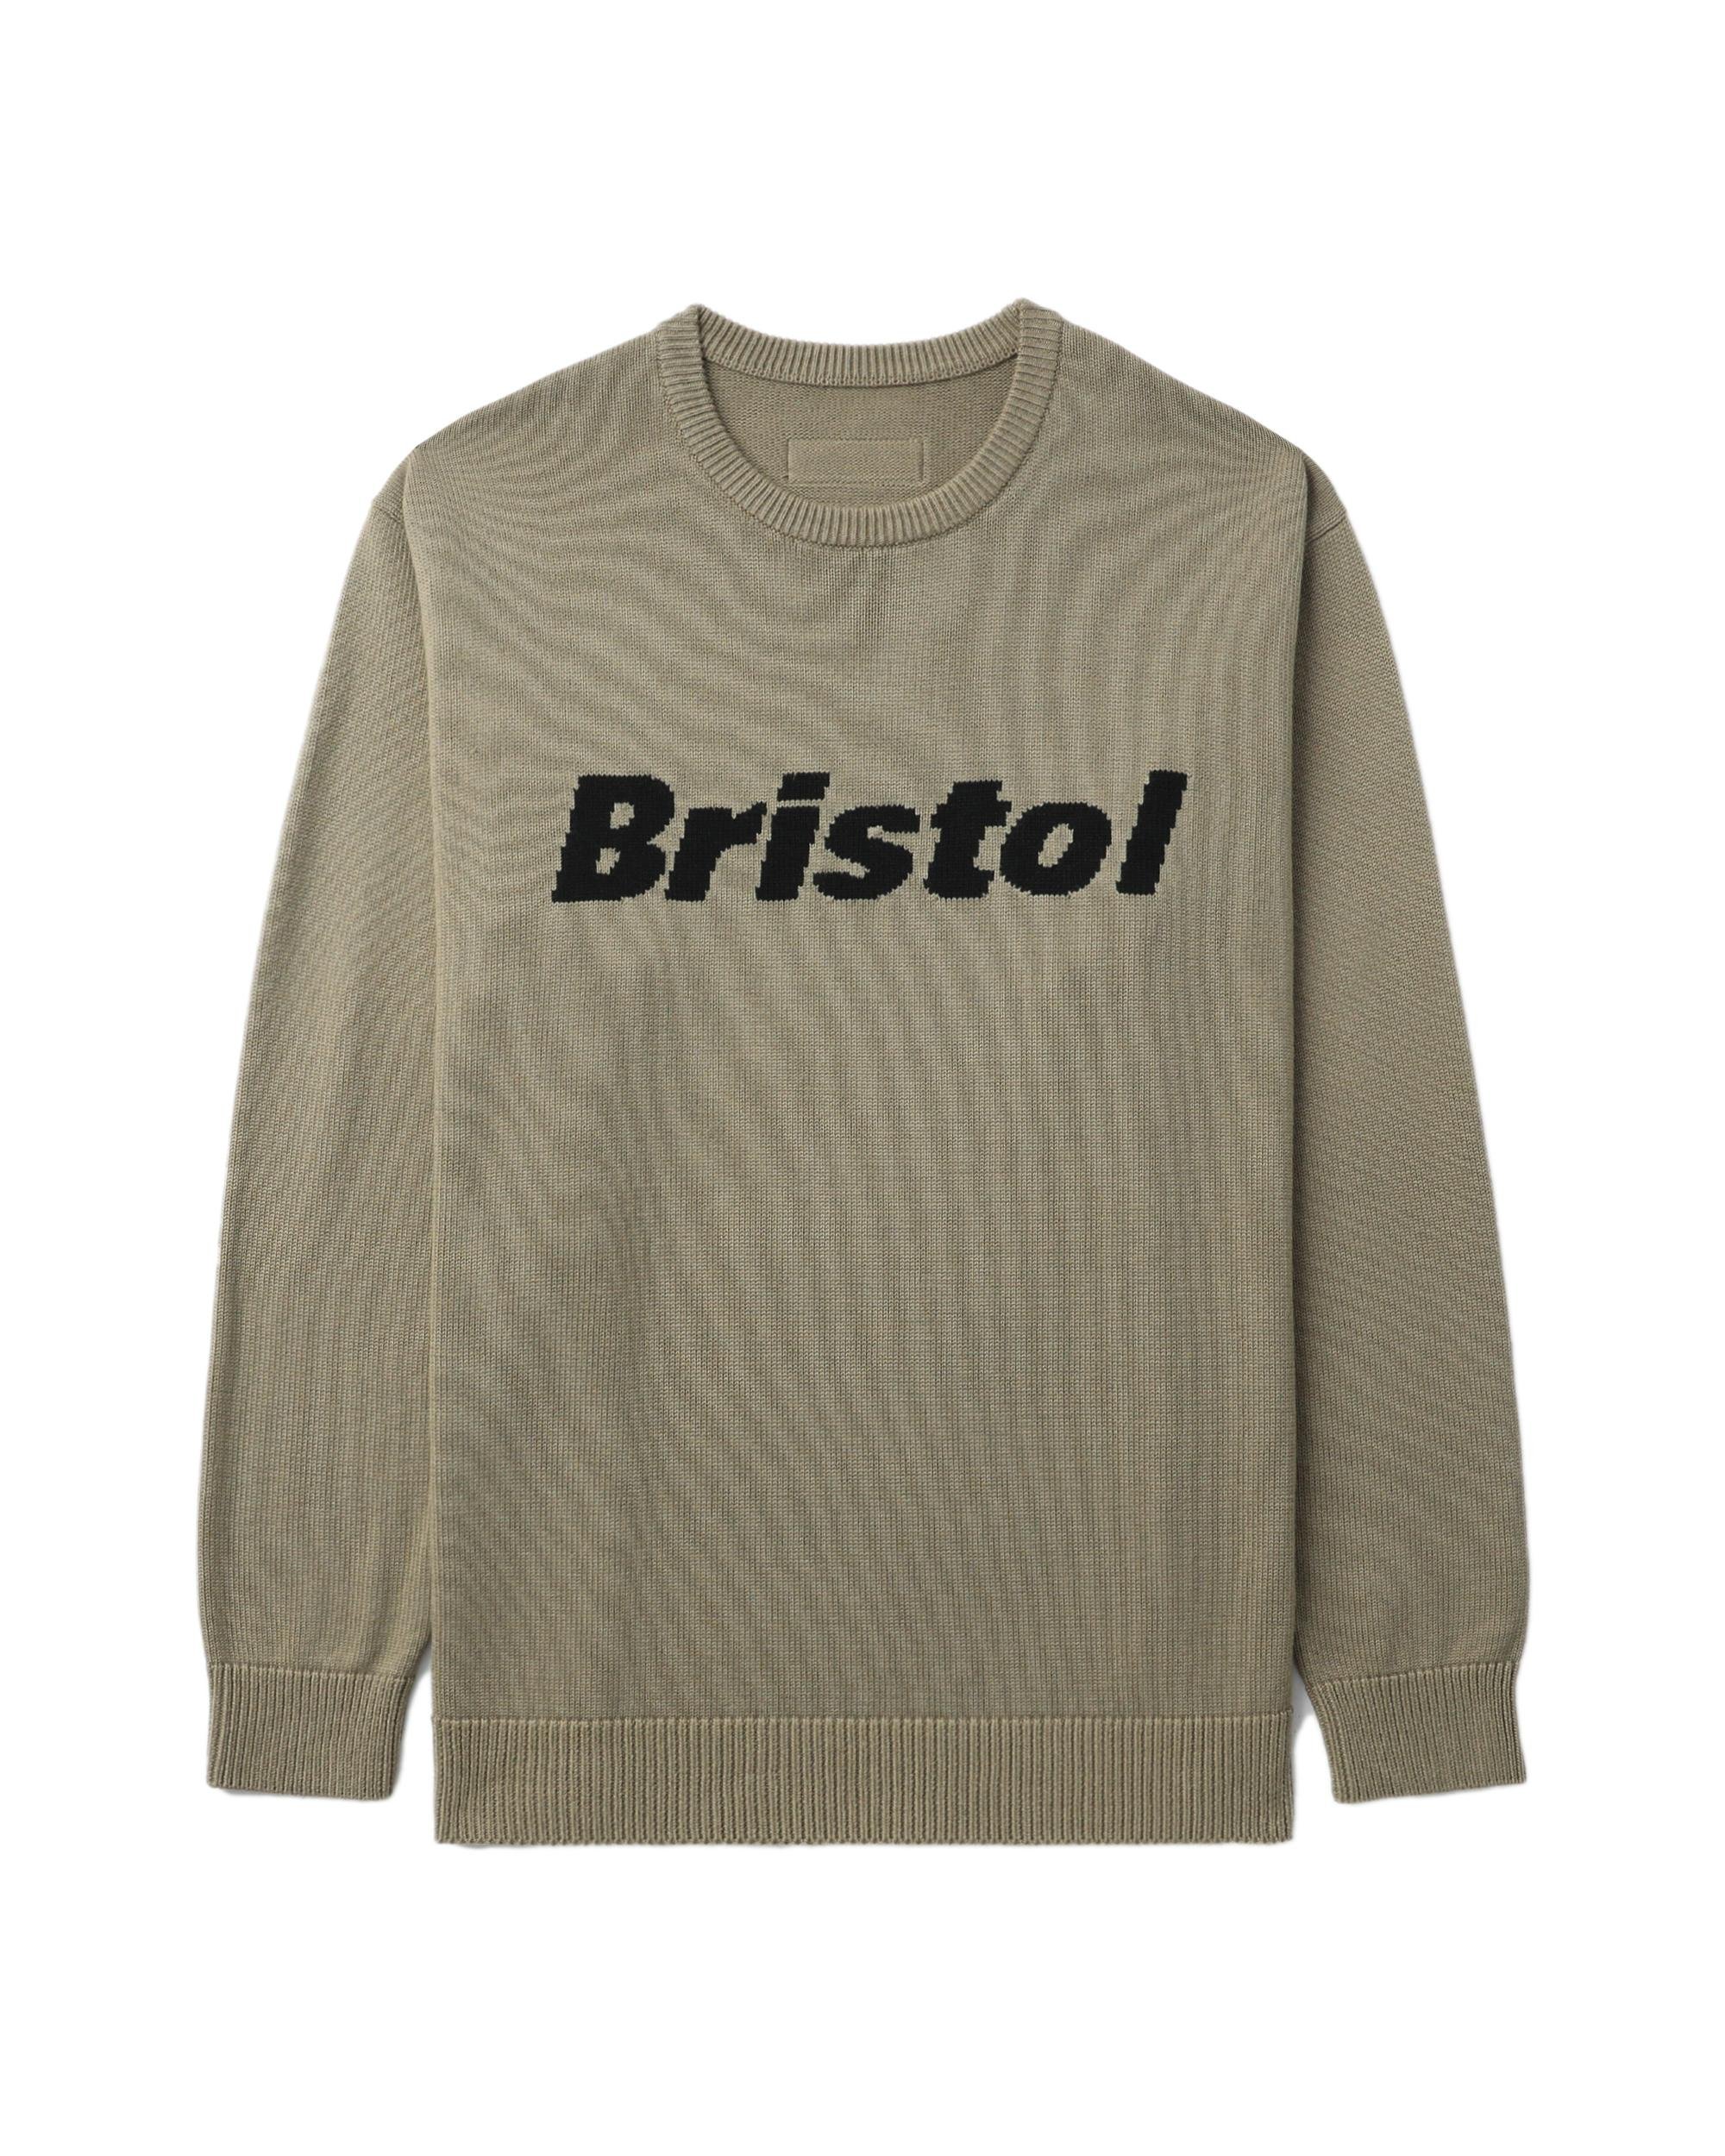 Authentic logo crew neck knit by F.C. REAL BRISTOL